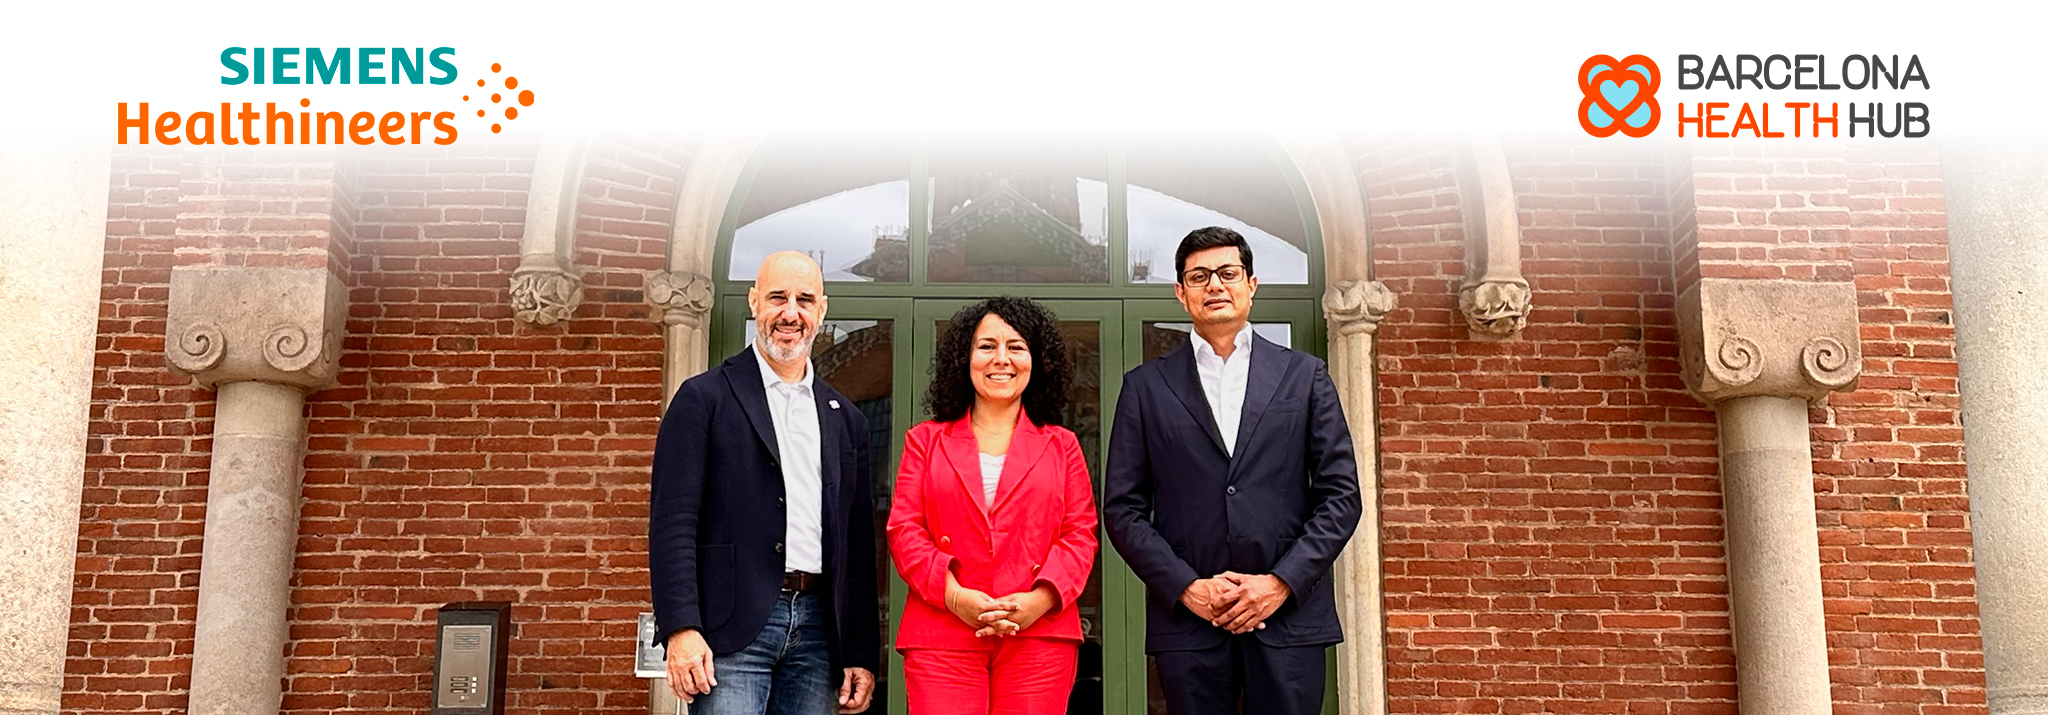 Siemens Healthineers and Barcelona Health Hub sign partnership to drive breakthrough innovations for equitable, quality healthcare